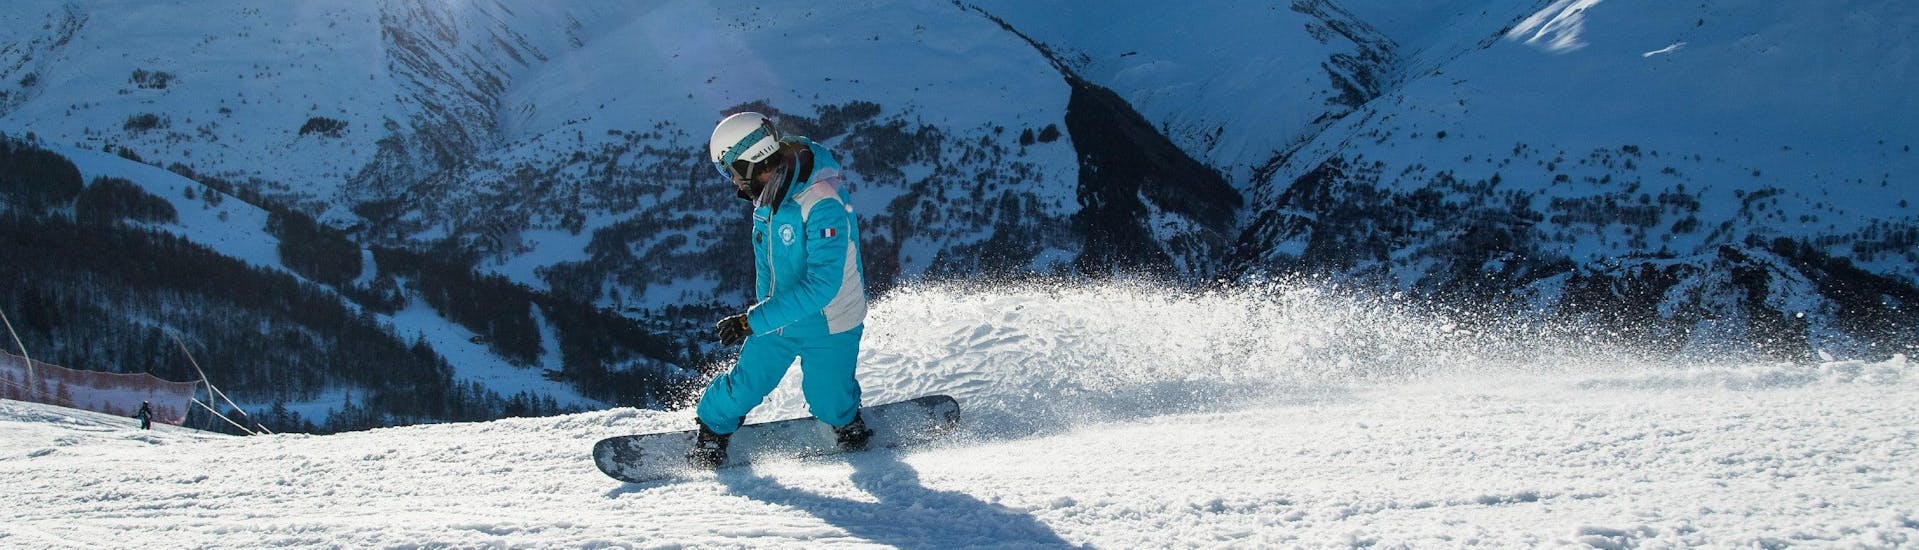 A snowboarding instructor from the ski school ESI Ecoloski Barèges is showing his snowboarding skills he uses during Private Snowboarding Lessons - Low Season.